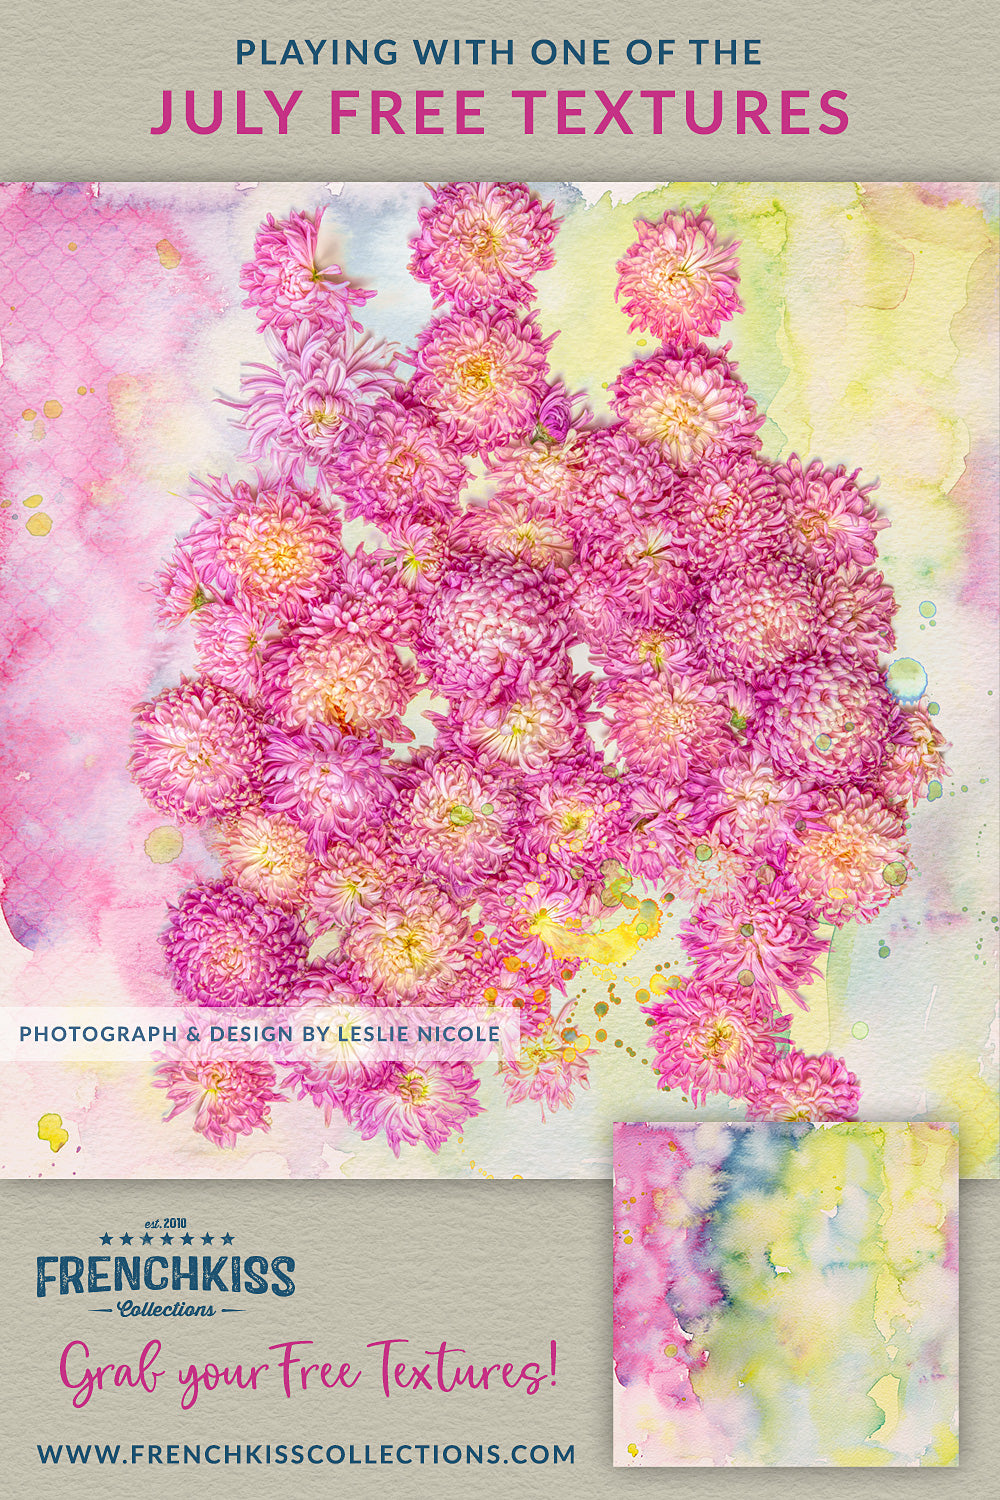 A photographic floral design created with one of this month's free textures.